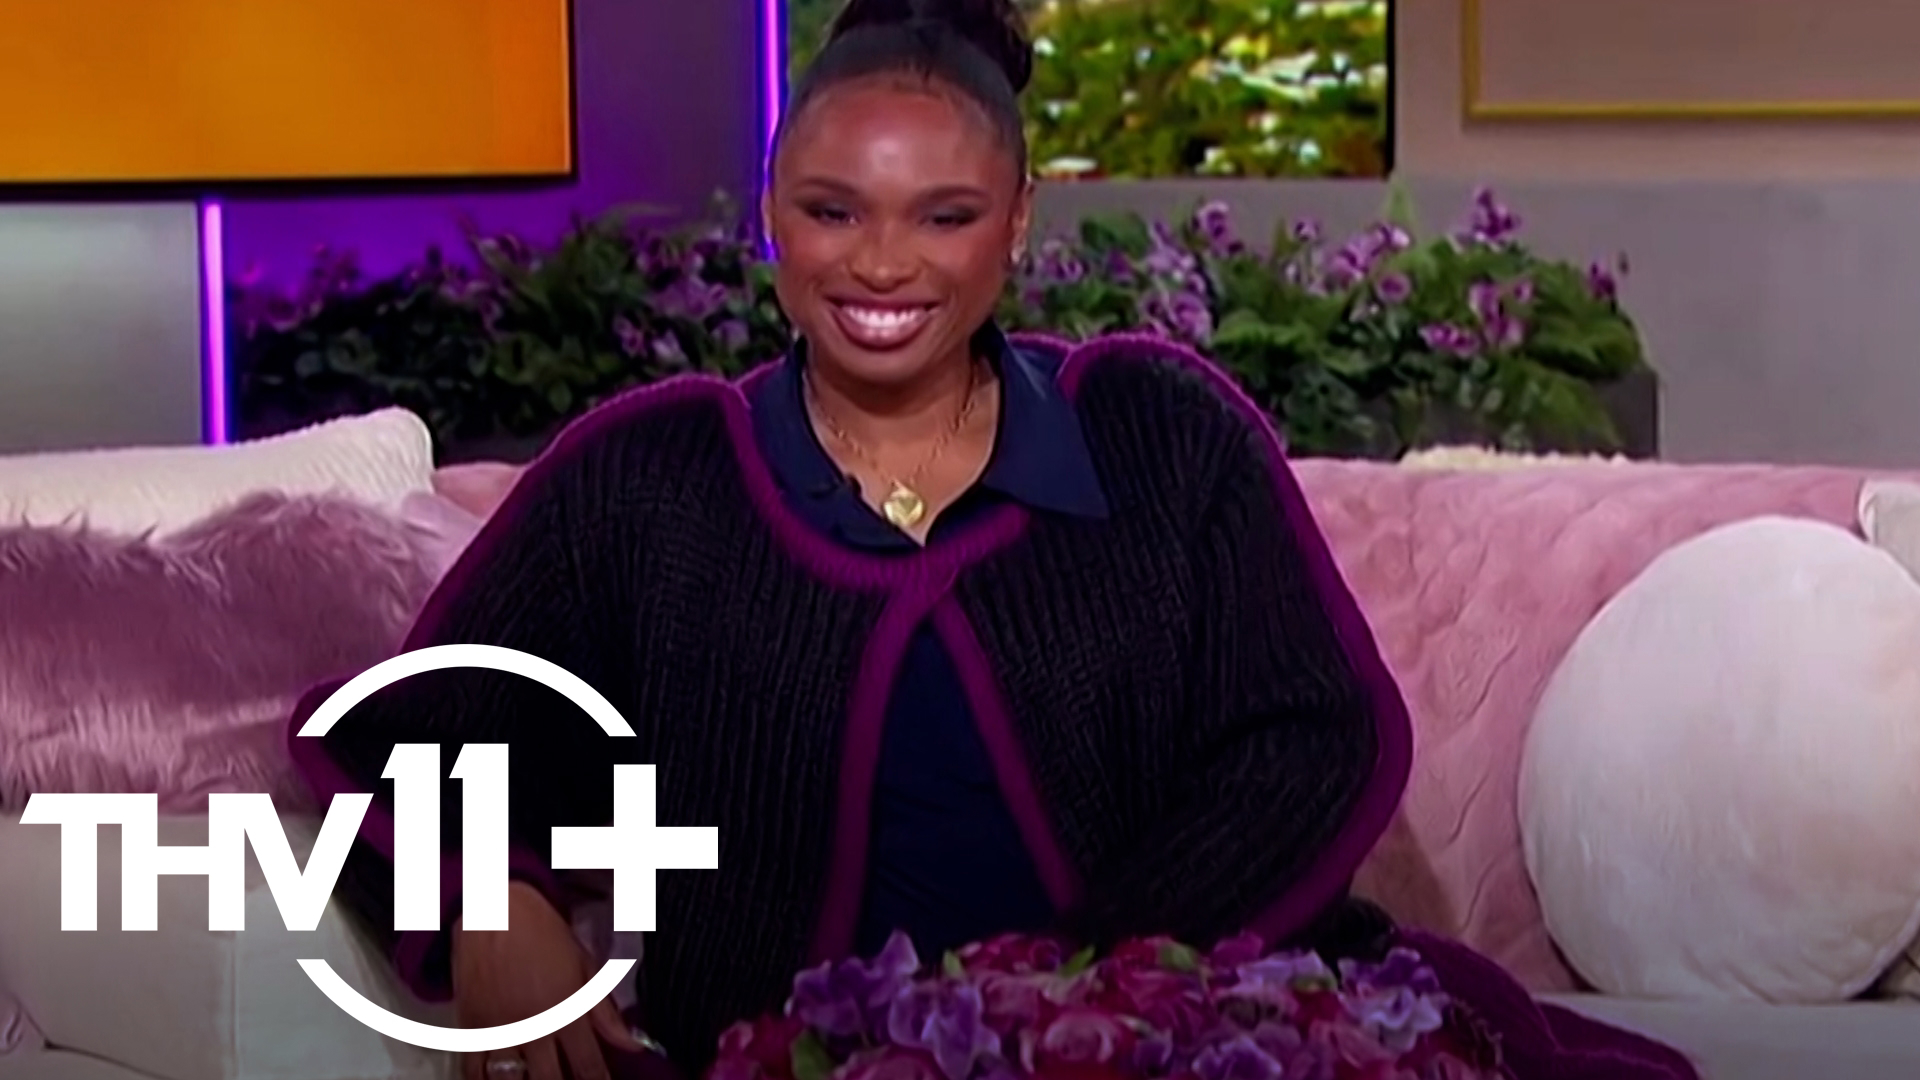 The iconic Jennifer Hudson talked with Faith Woodard about her popular show and also got her to sing one of her songs!